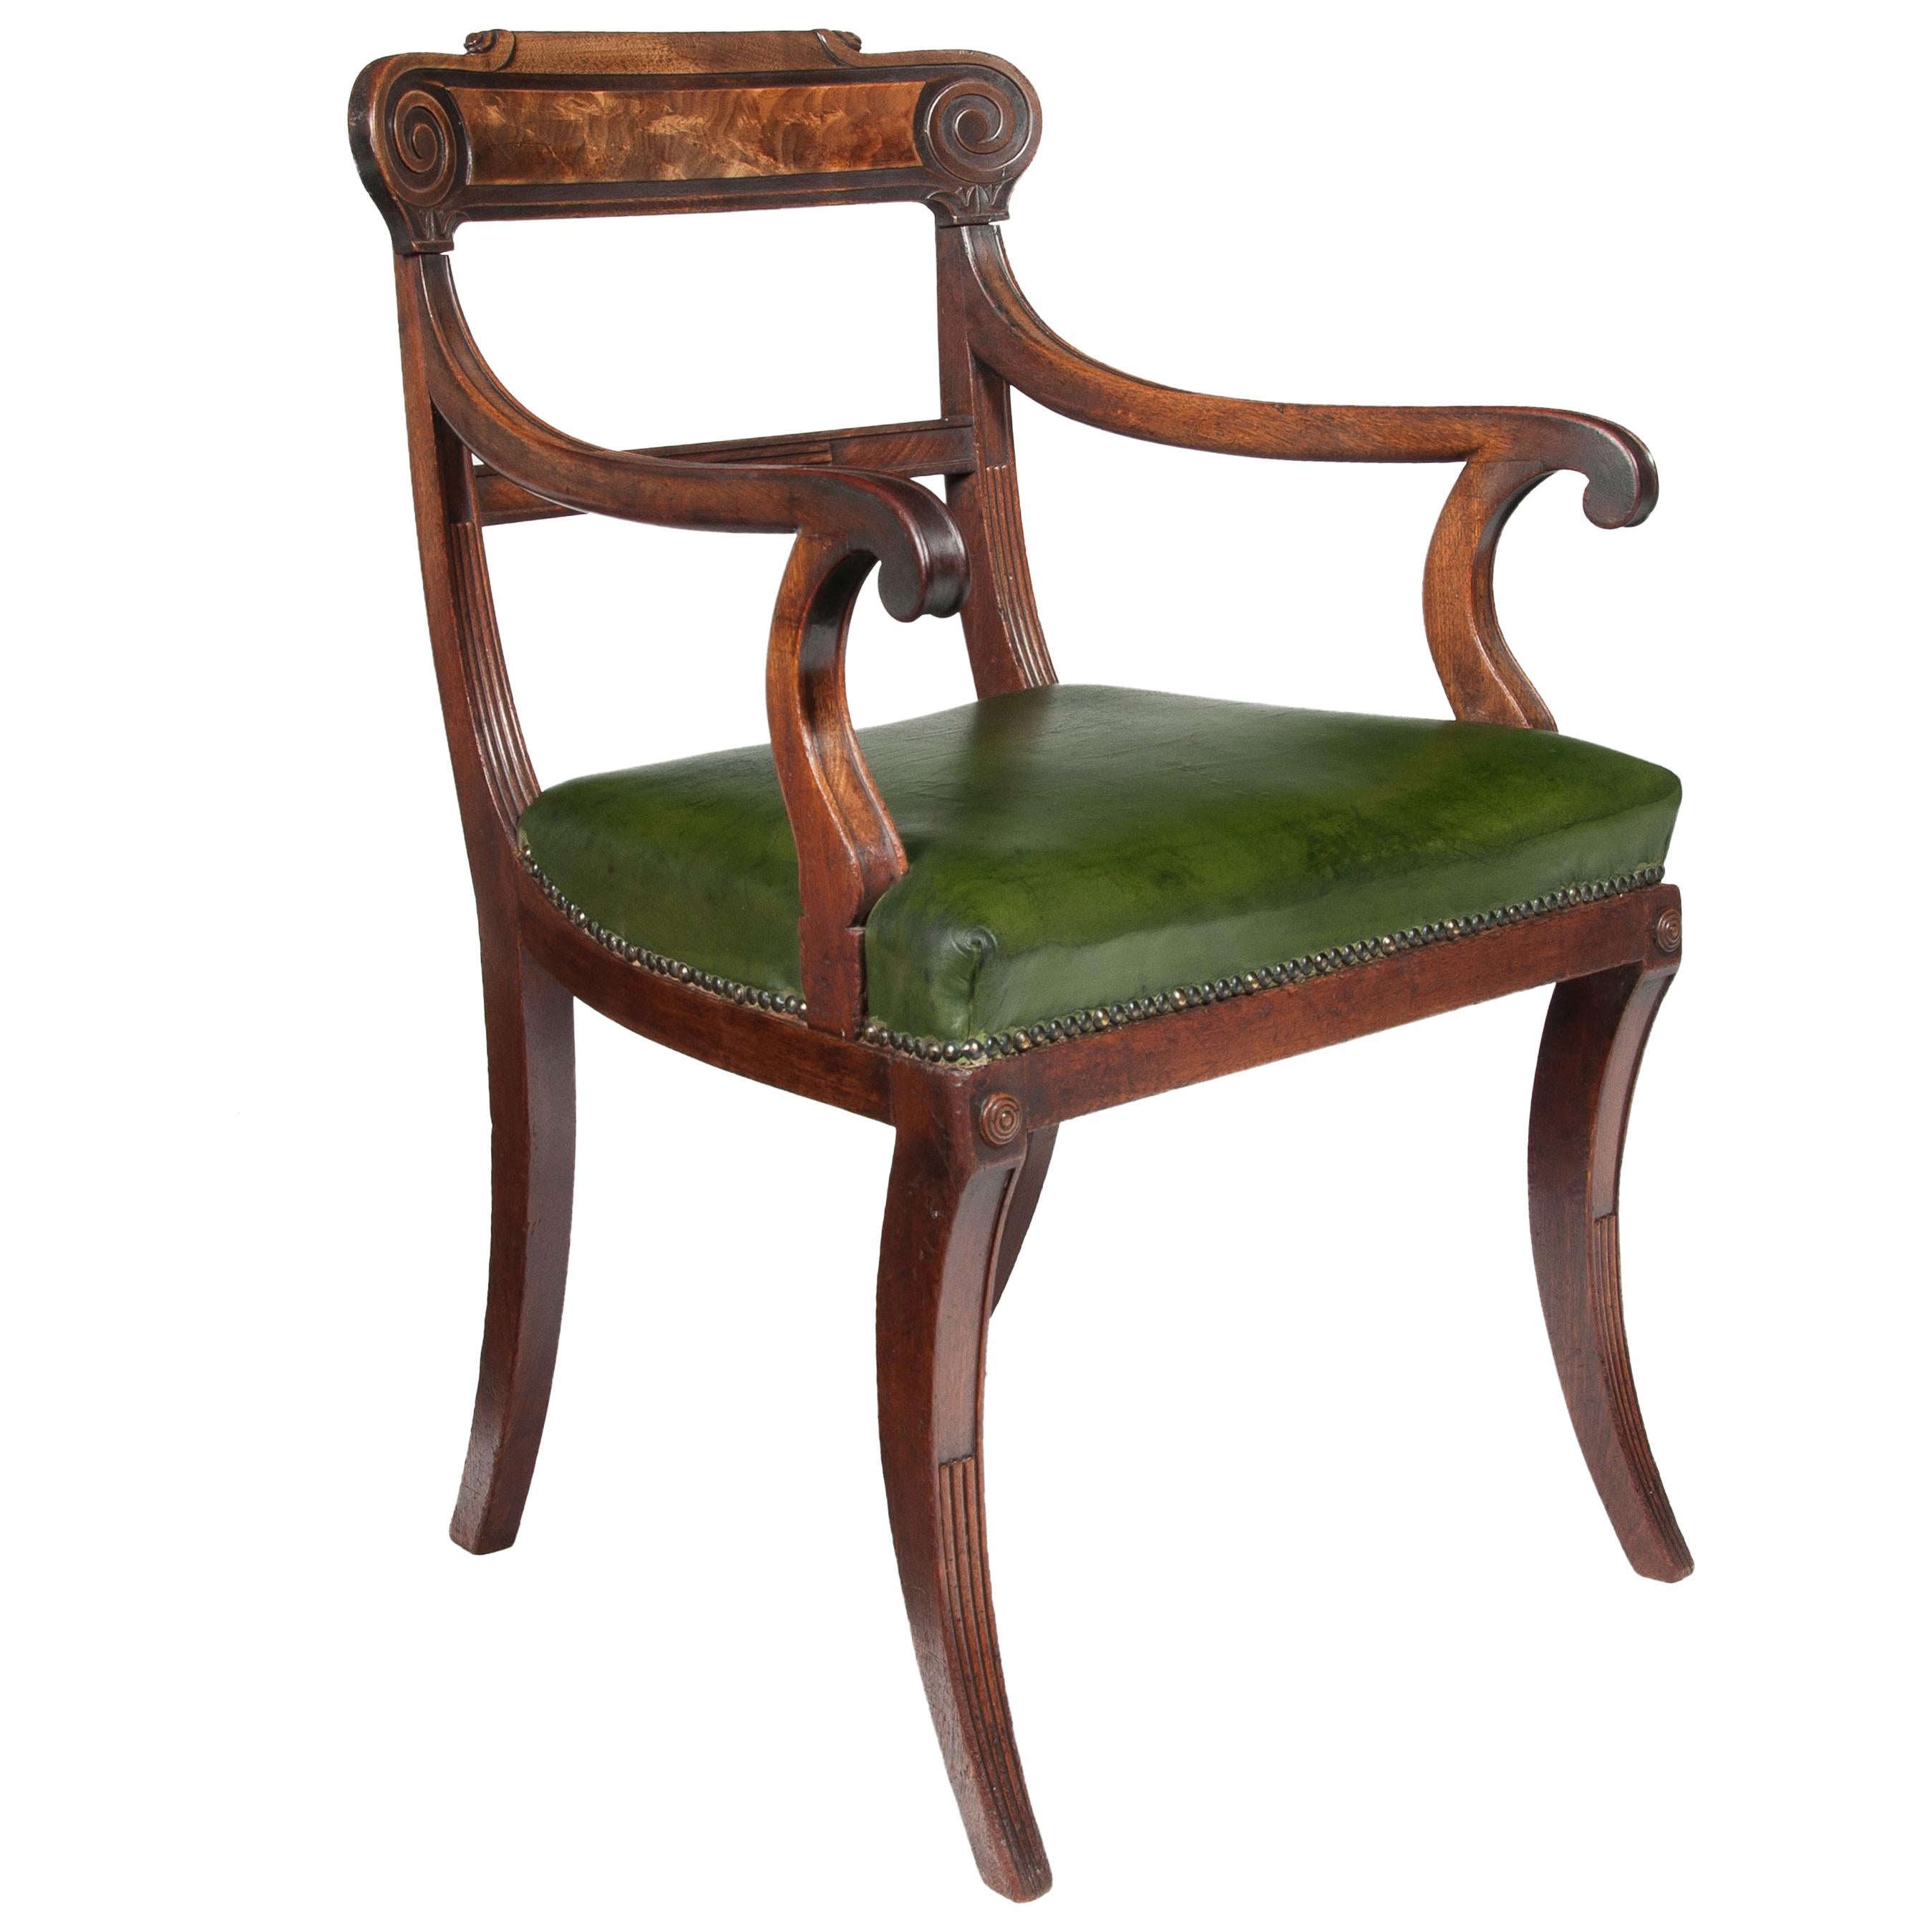 Superb Untouched Regency Mahogany Open Armchair with Leather Seat